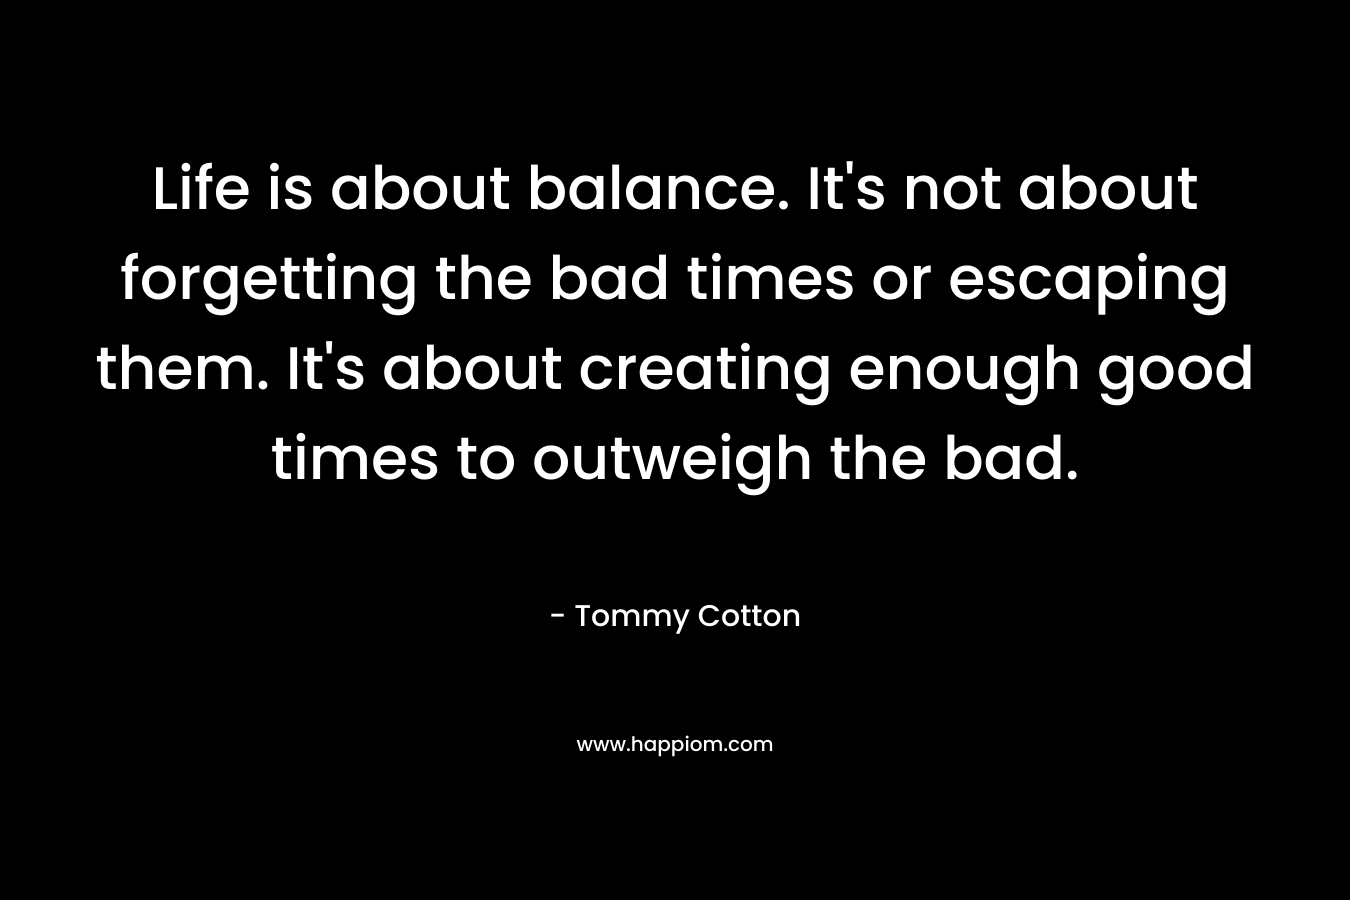 Life is about balance. It's not about forgetting the bad times or escaping them. It's about creating enough good times to outweigh the bad.